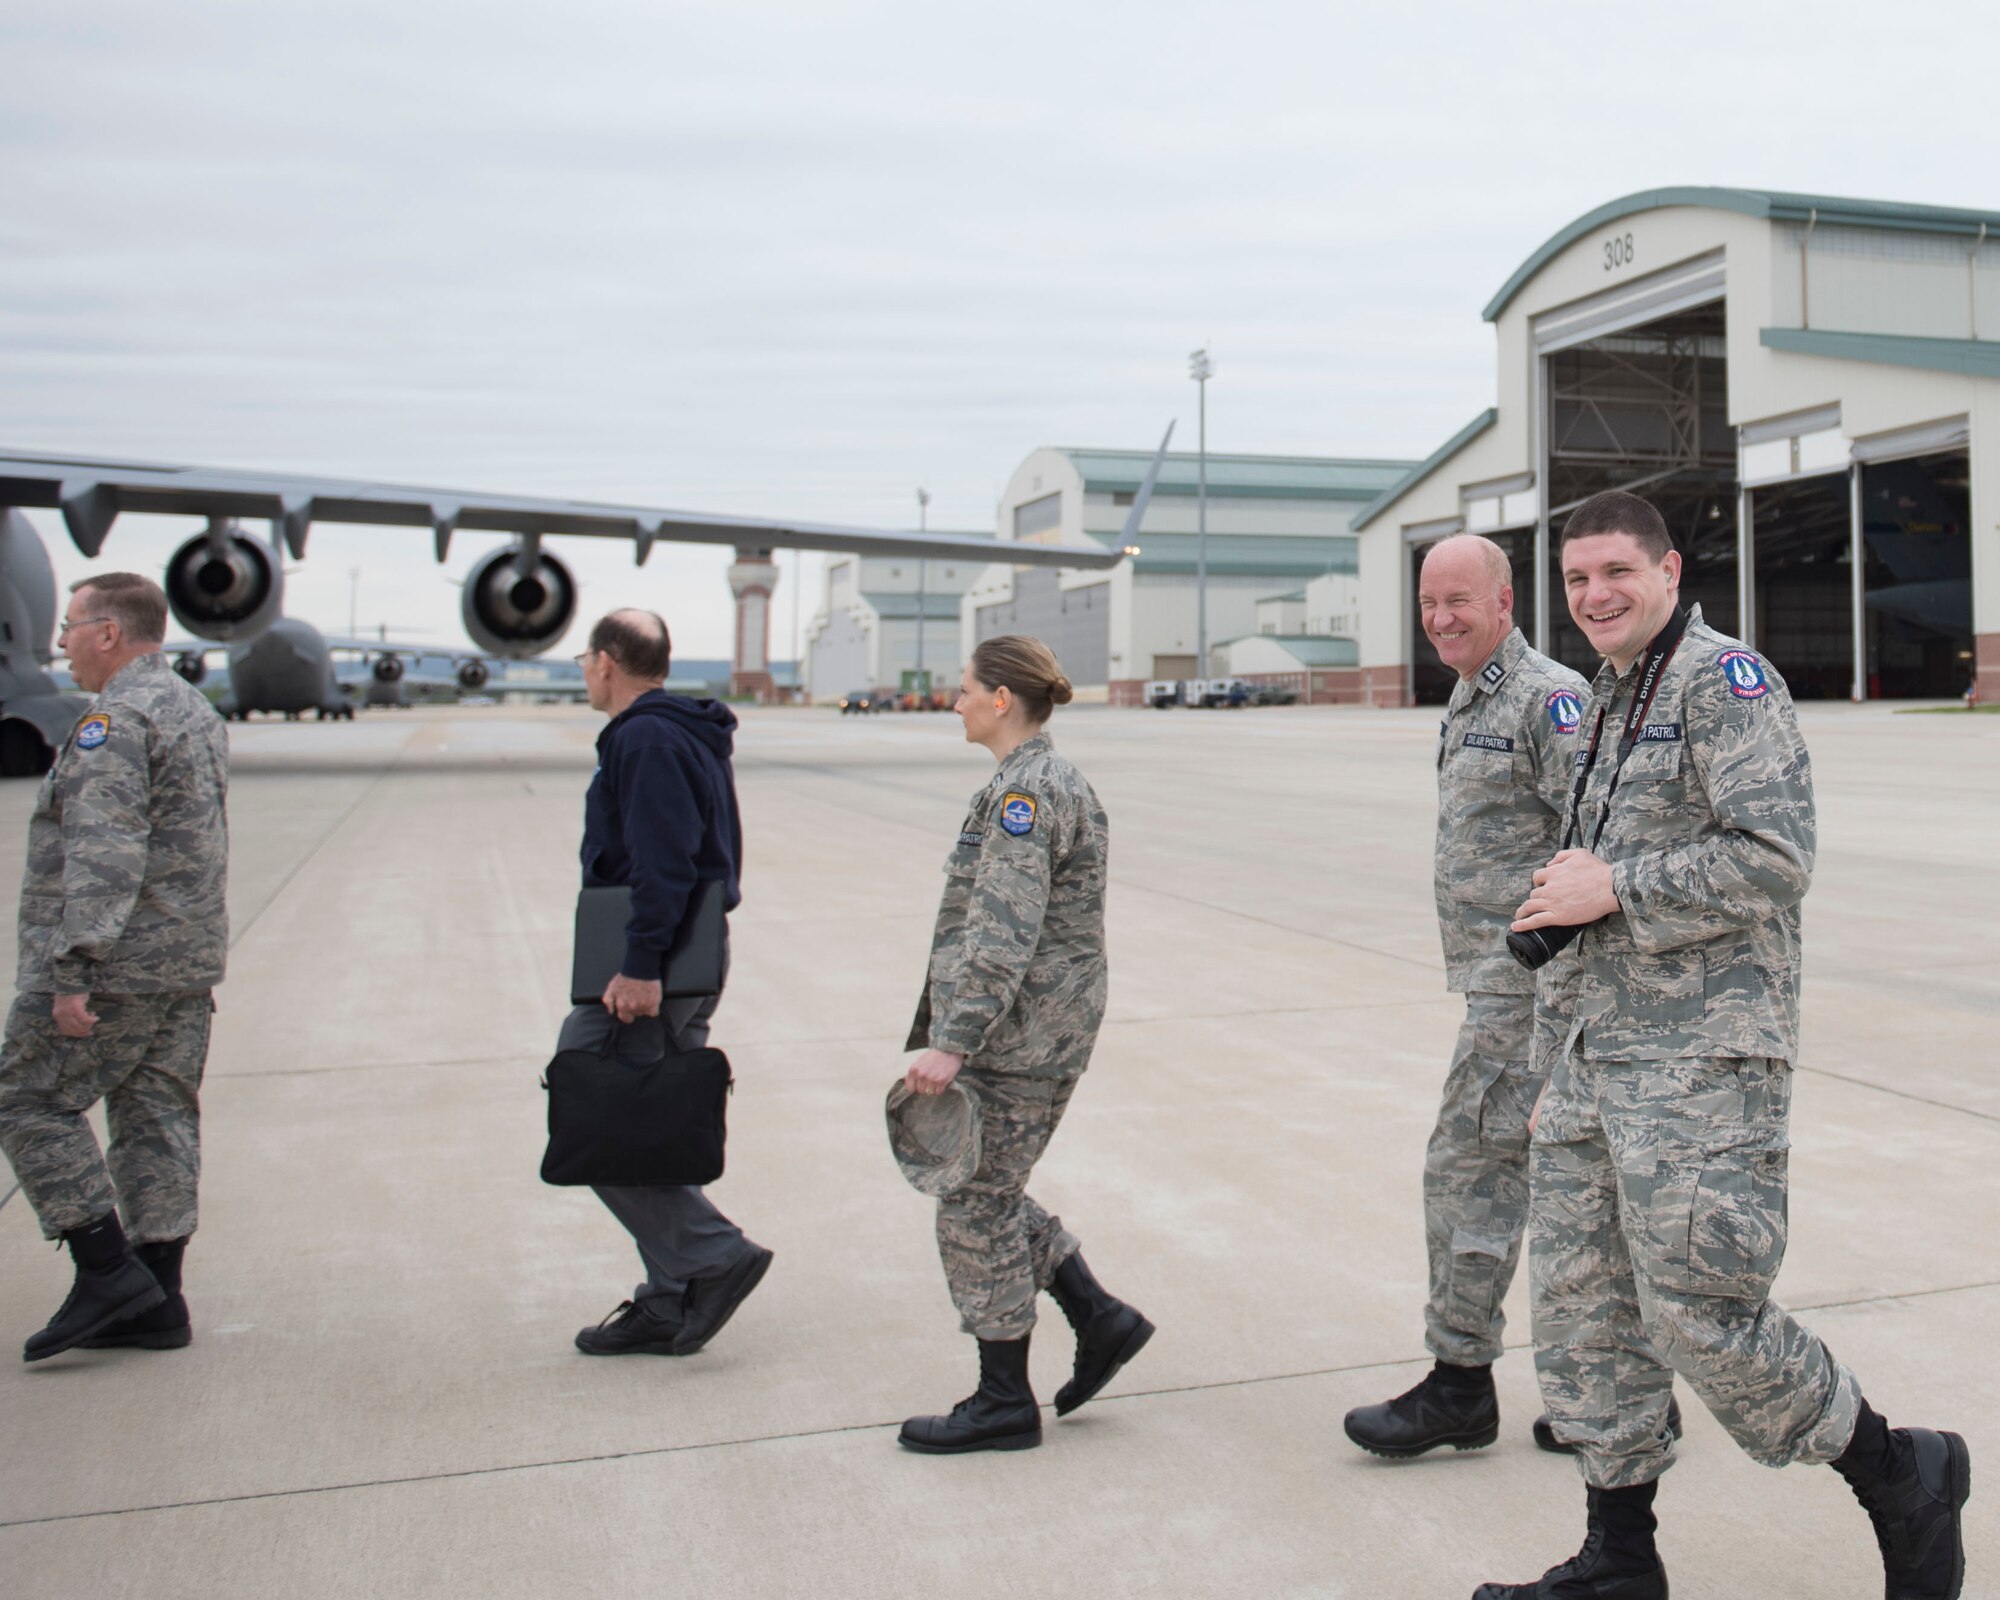 Civil Air Patrol Maj. Jacob Bixler, far right, walks across the flight line to a C-17 Globemaster III aircraft with fellow CAP members, at the 167th Airlift Wing, West Virginia Air National Guard, May 17, 2019, as part of an orientation flight. Bixler is the Wing Director of Cadet Programs for Virginia Wing, CAP. He is also a radio frequency transmissions systems craftsman for the 167th AW